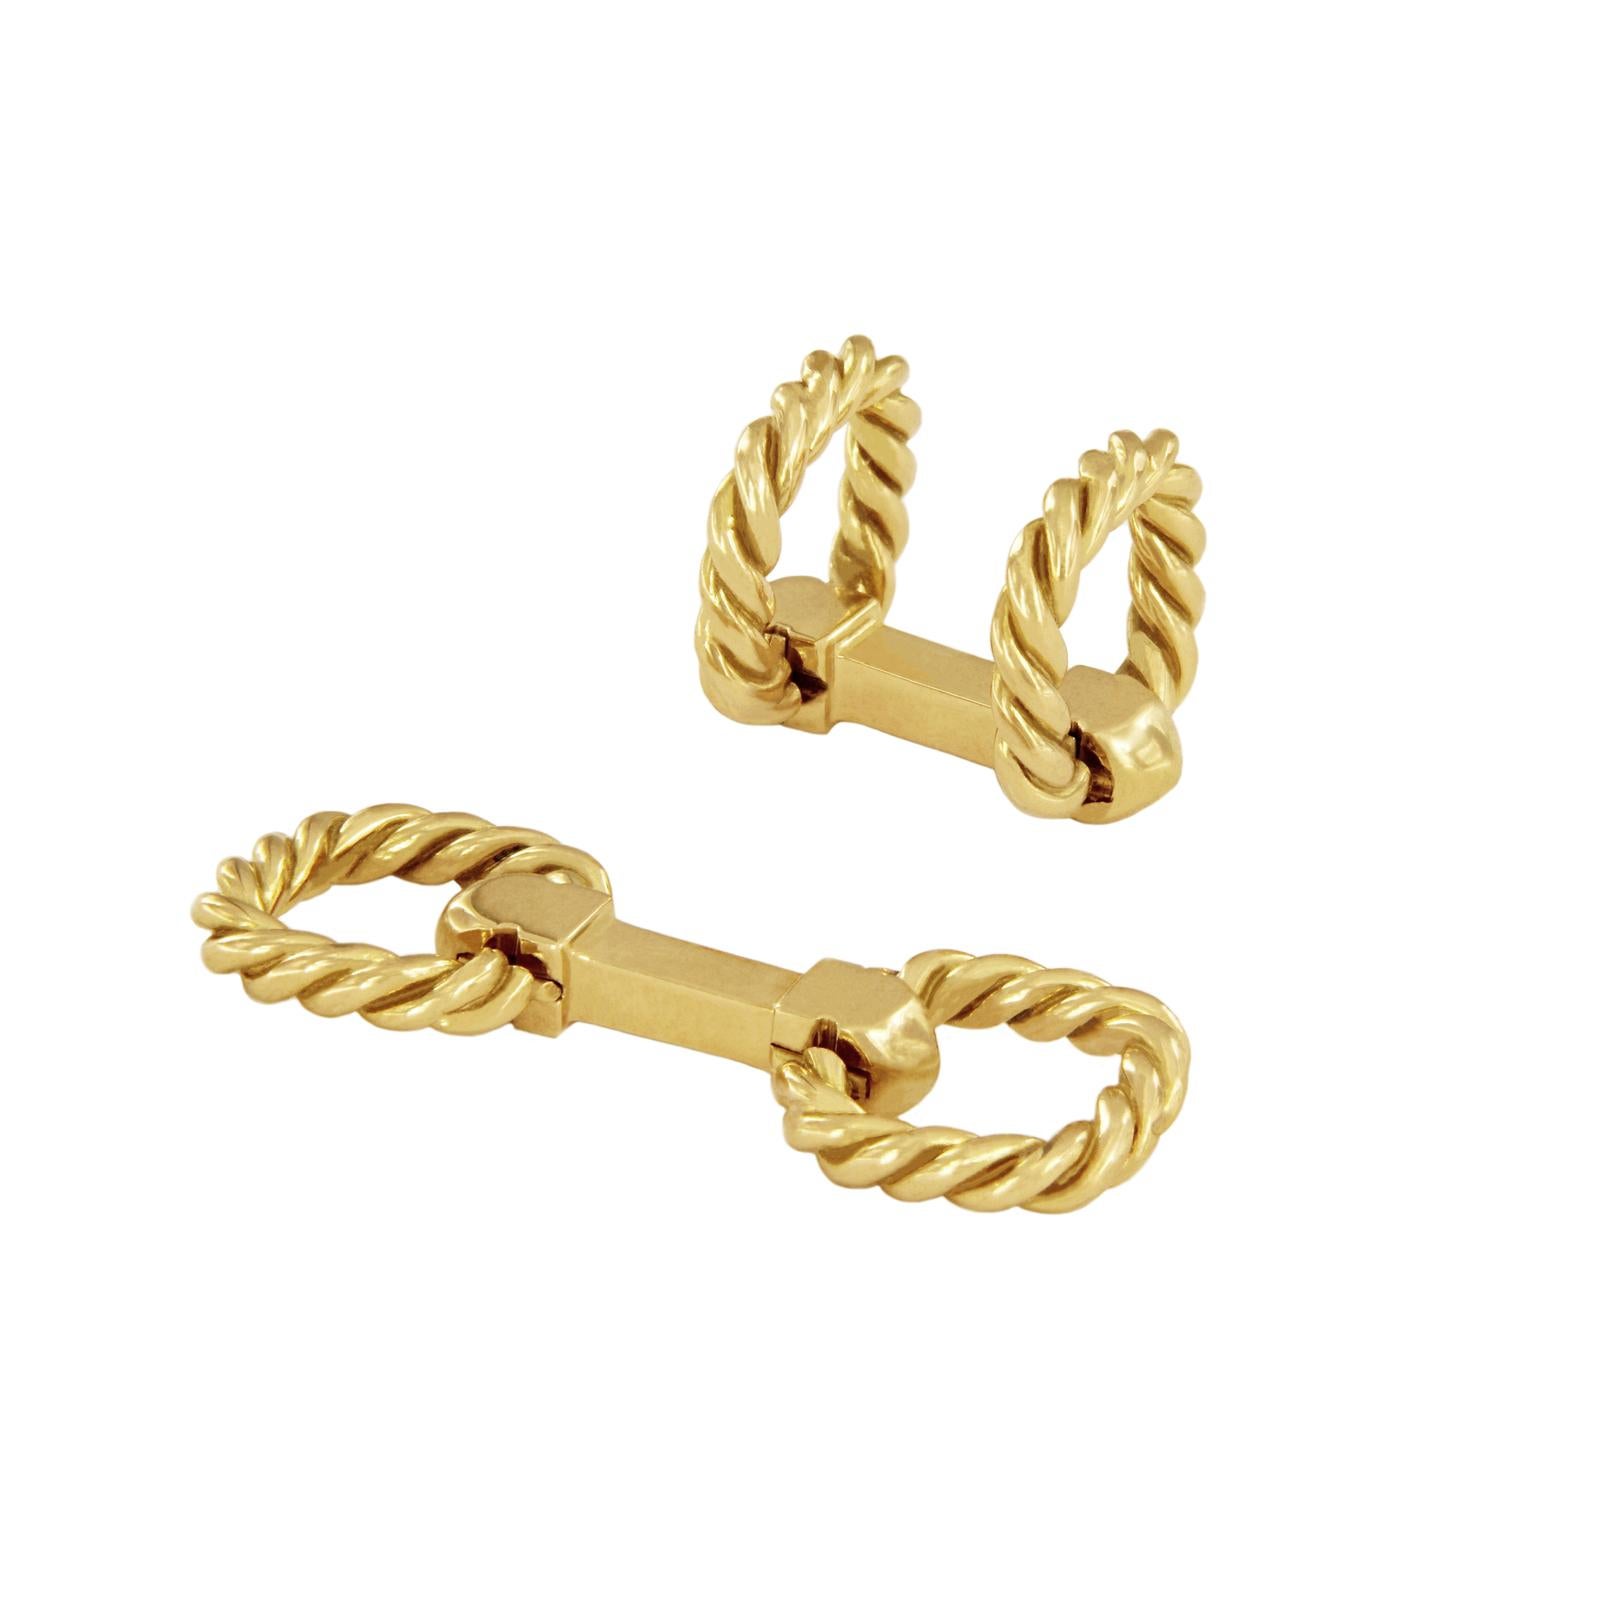 David Yurman Rare Cable 18 Karat Yellow Gold Cufflinks In Excellent Condition For Sale In New York, NY